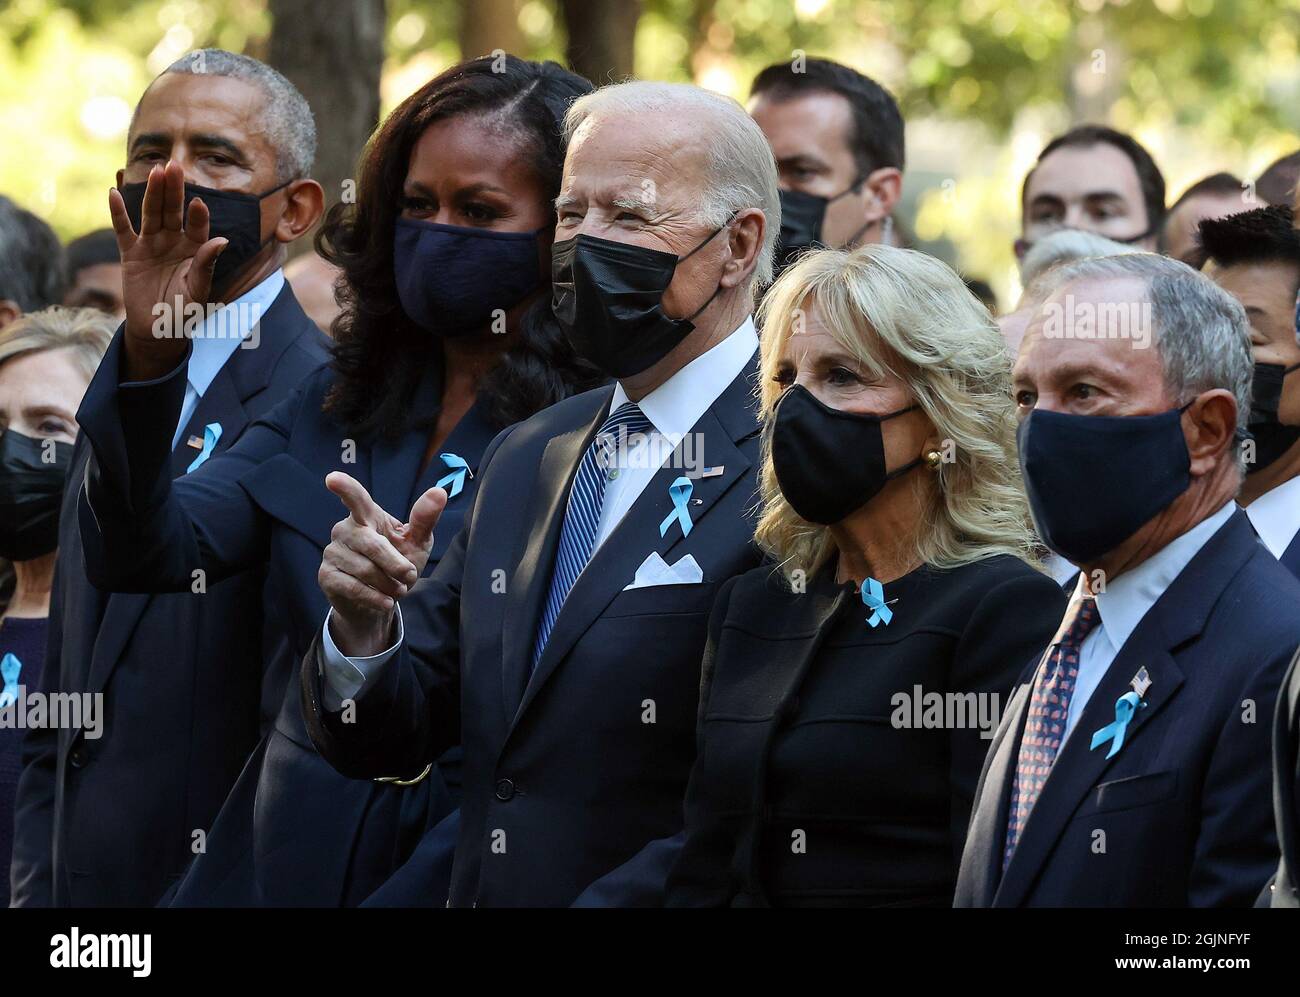 New York, USA. 11th Sep, 2021. Former President Barack Obama, former First Lady Michelle Obama, President Joe Biden, First Lady Jill Biden, and former New York City Mayor Michael Bloomberg (left to right) attend the 20th anniversary ceremony of the September 11 terror attacks at the National 9/11 Memorial and Museum in New York City, N.Y., on September 11, 2021. Pool photo by Chip Somodevilla/UPI Credit: UPI/Alamy Live News Stock Photo